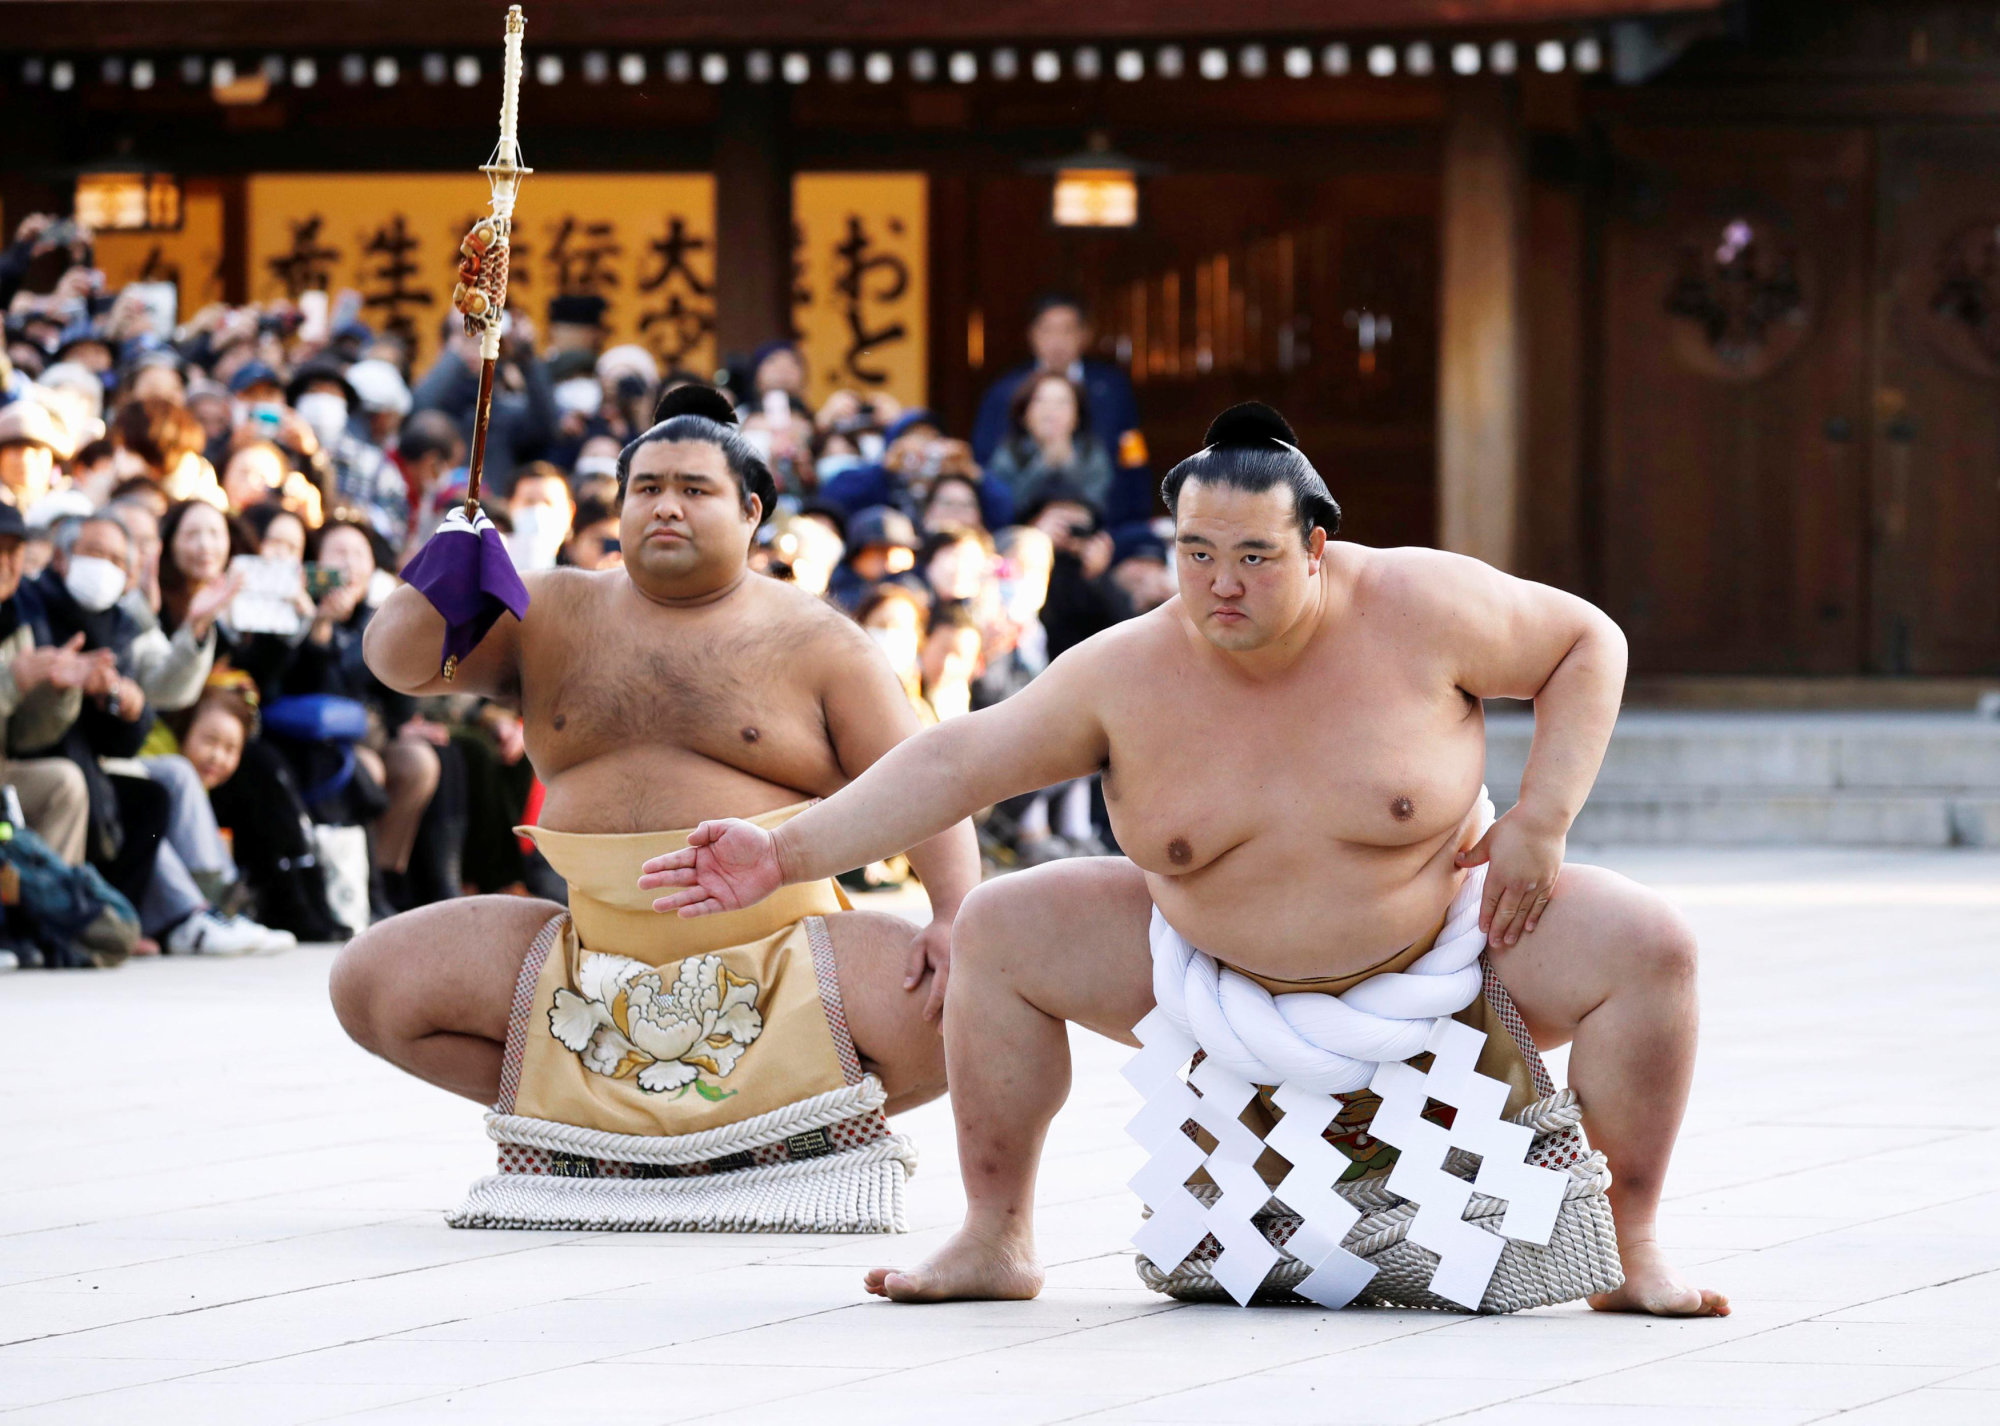 Newly promoted sumo grand champion Kisenosato, wearing a ceremonial belly band, performs a sacred ring-entering ritual at Meiji Shrine in Tokyo on Jan. 27. | KYODO VIA REUTERS